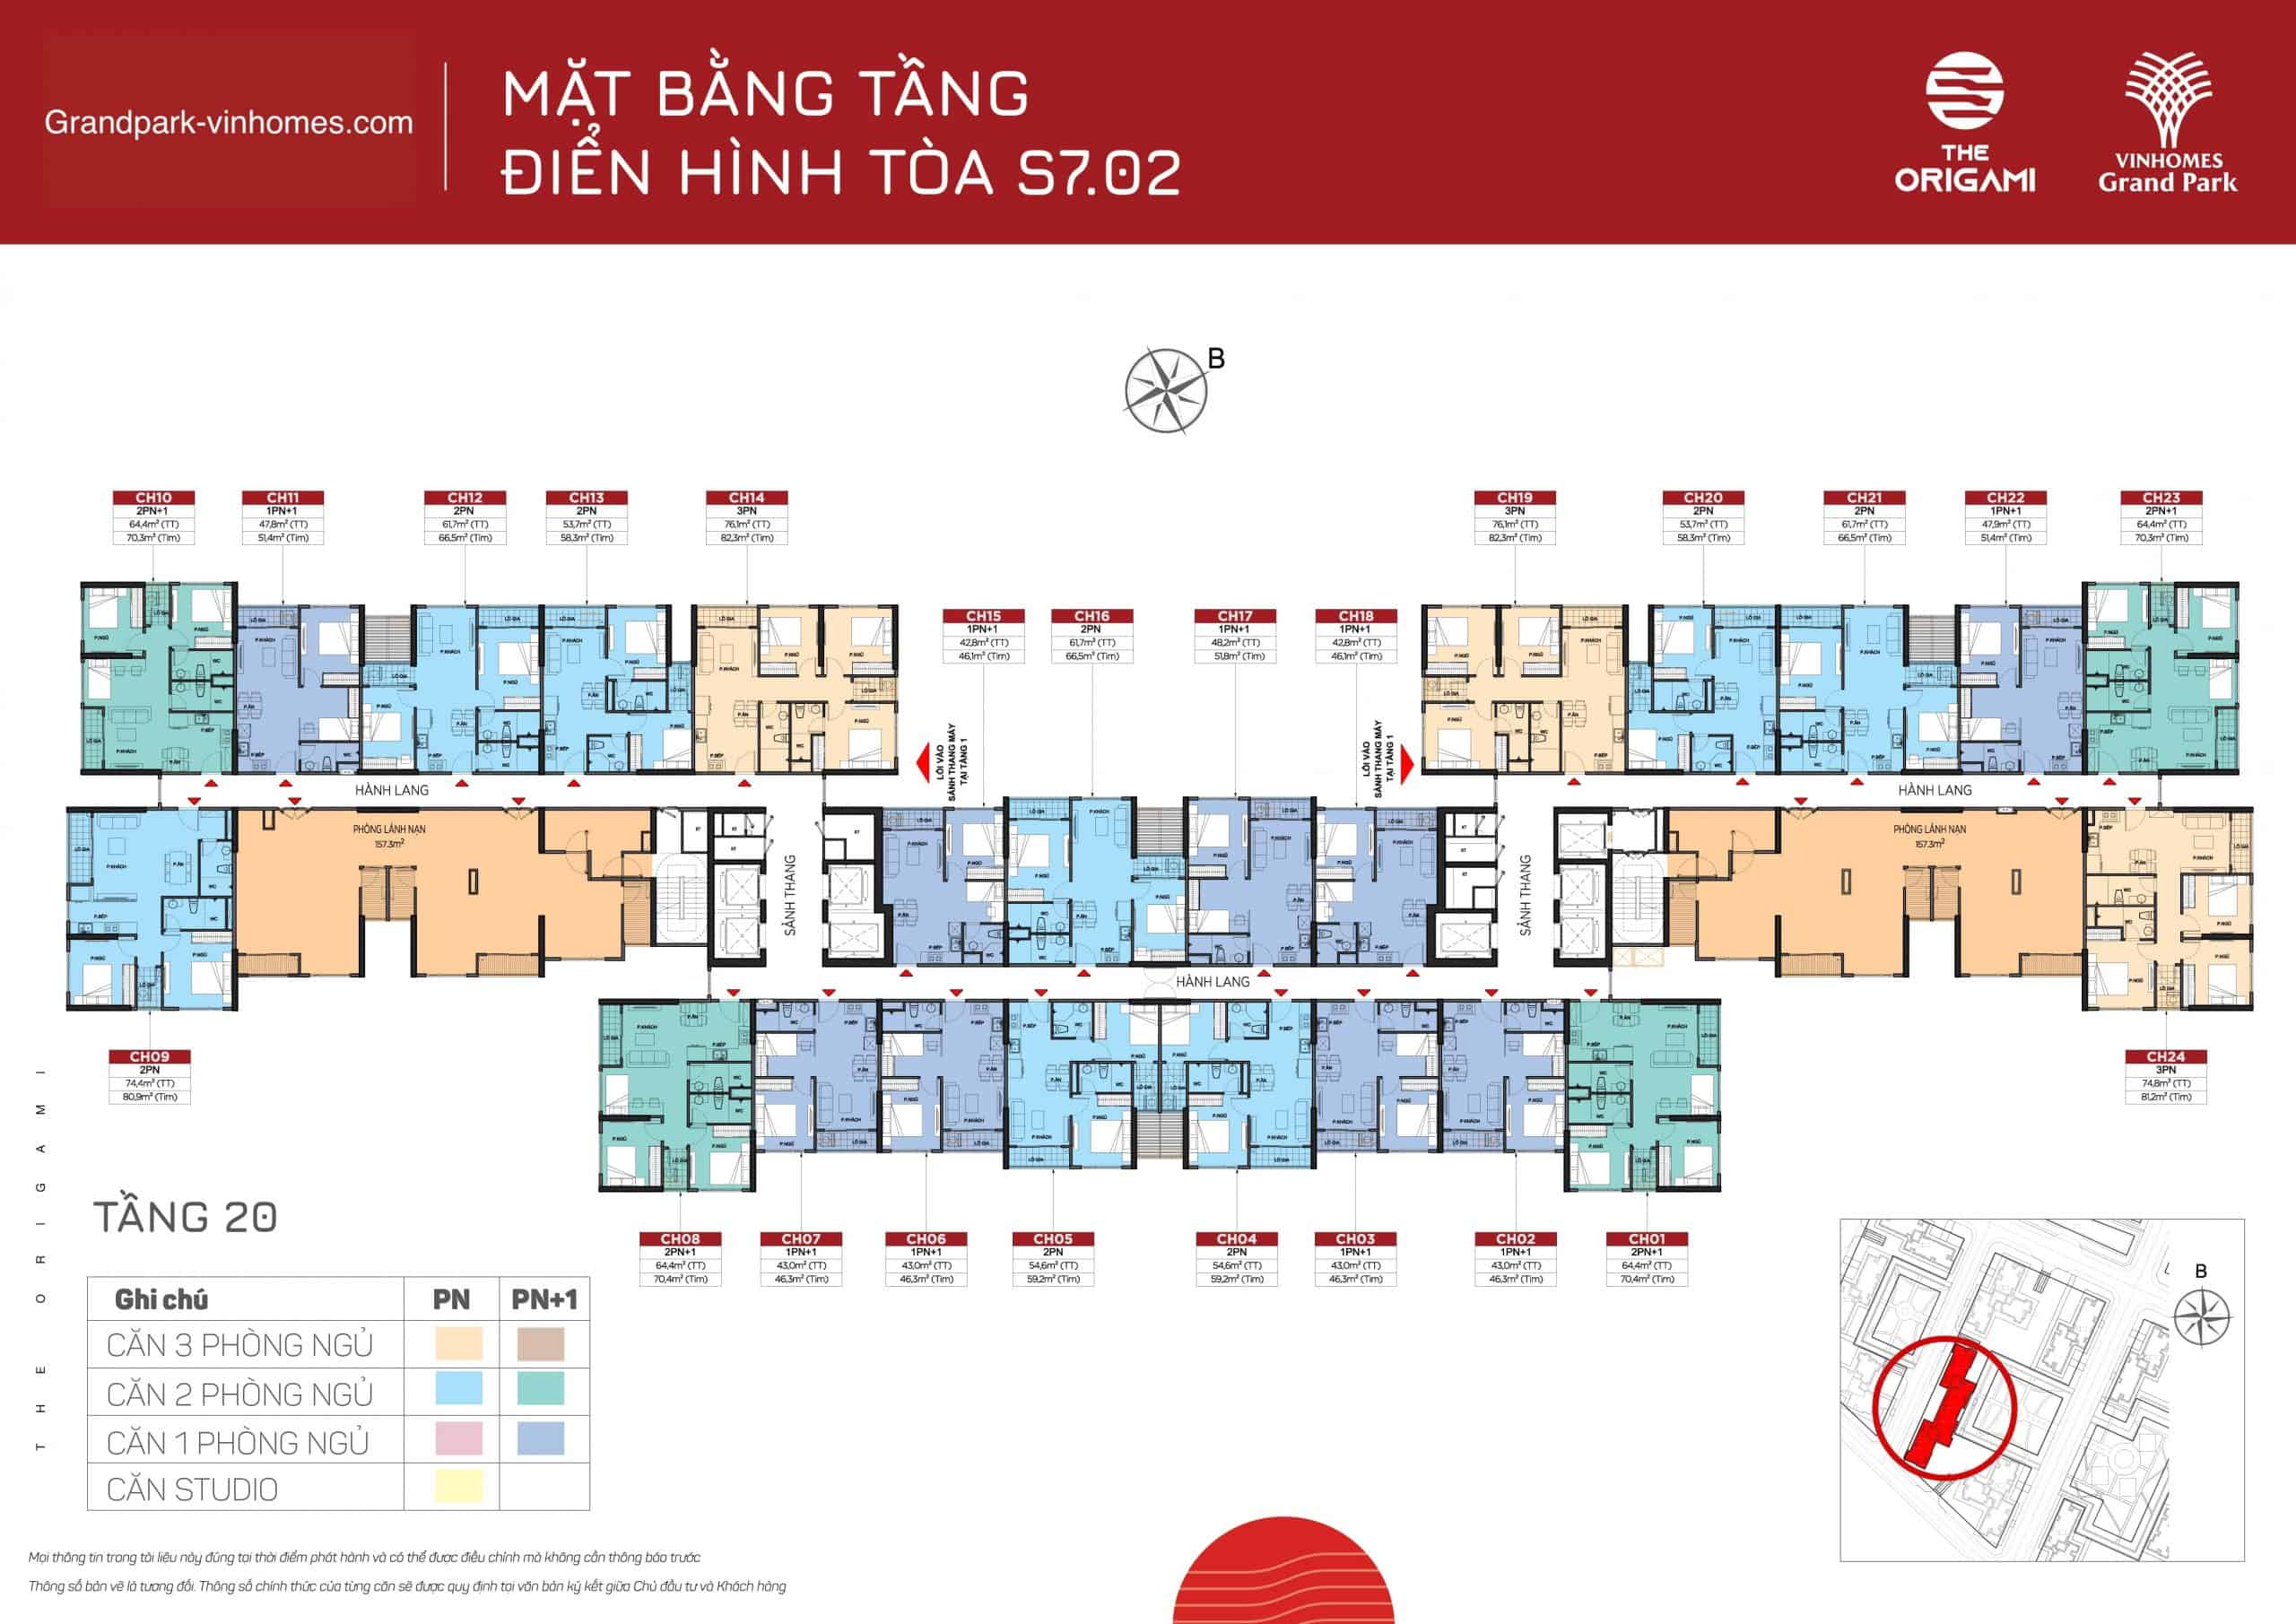 layout tòa s702 tầng 20